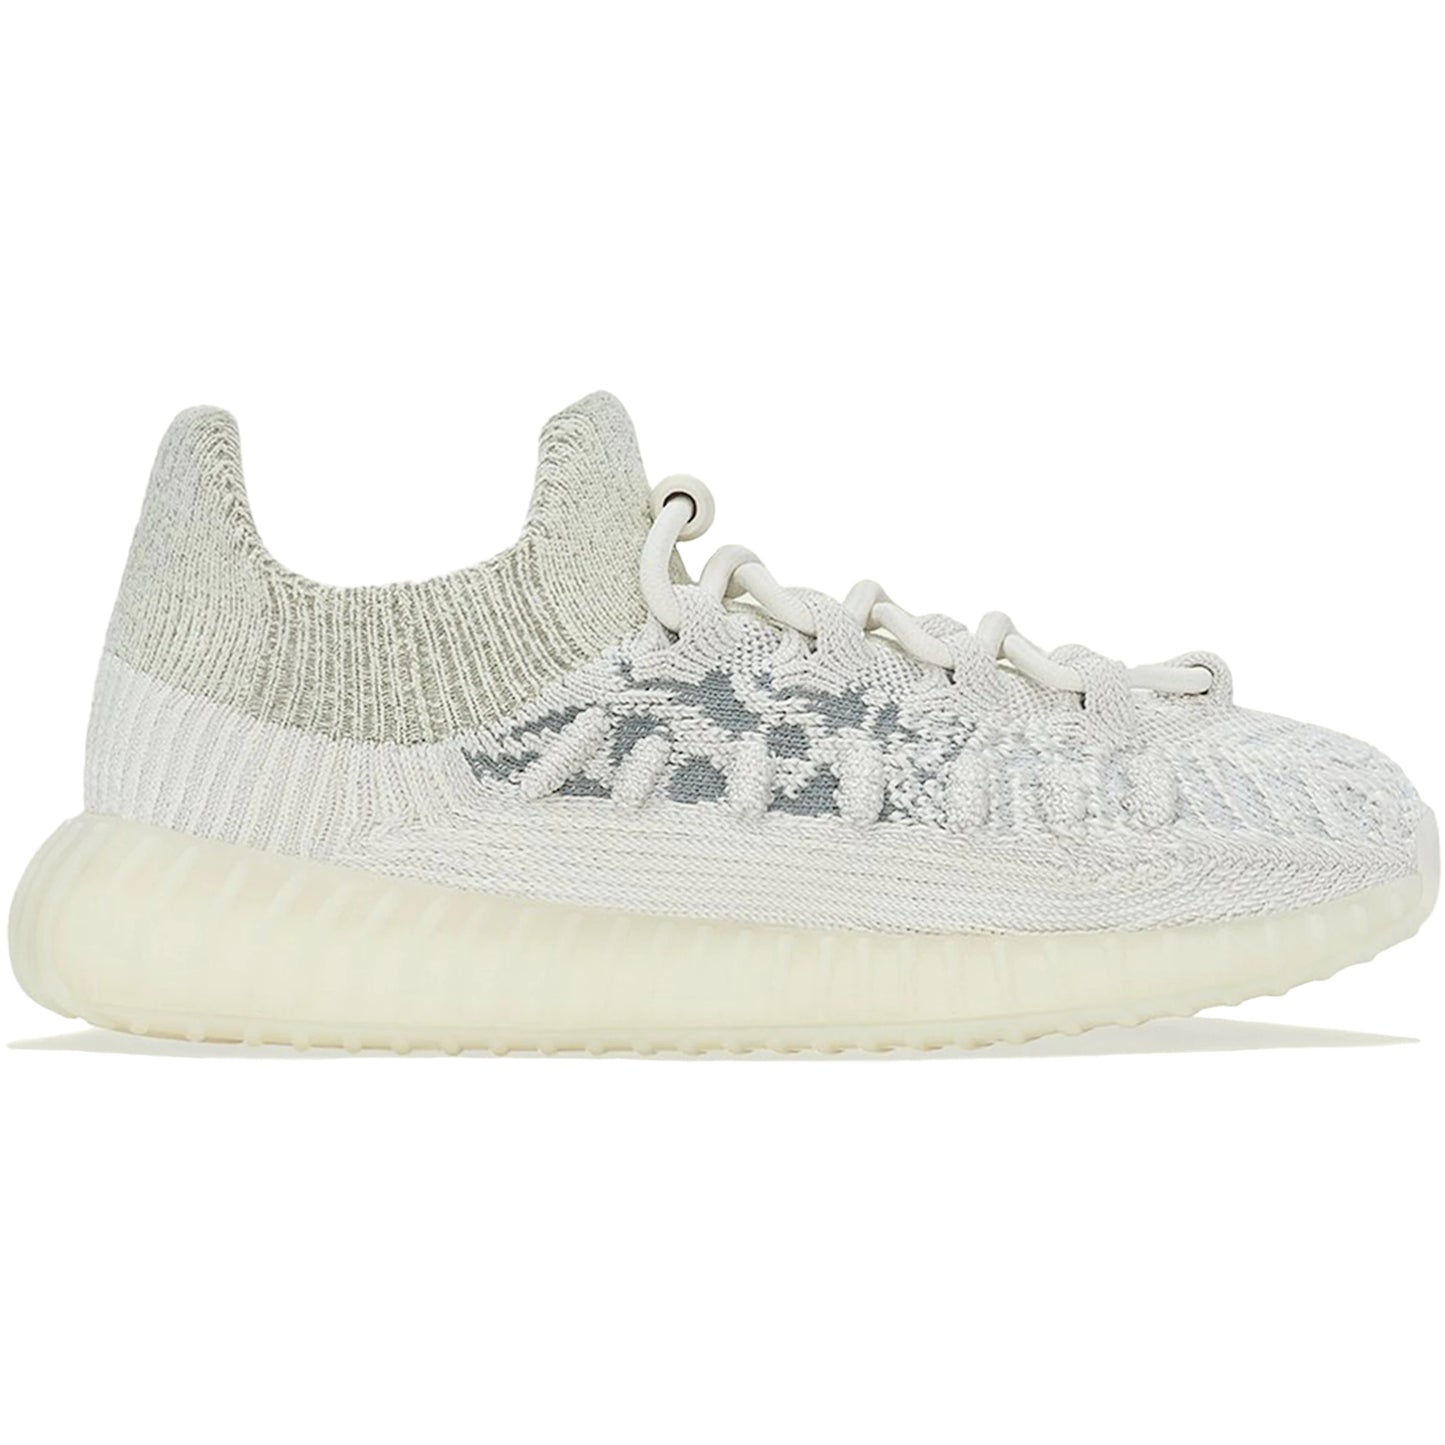 Adidas | Yeezy Boost 350 V2 'CMPCT' | HQ4632 | Toddler